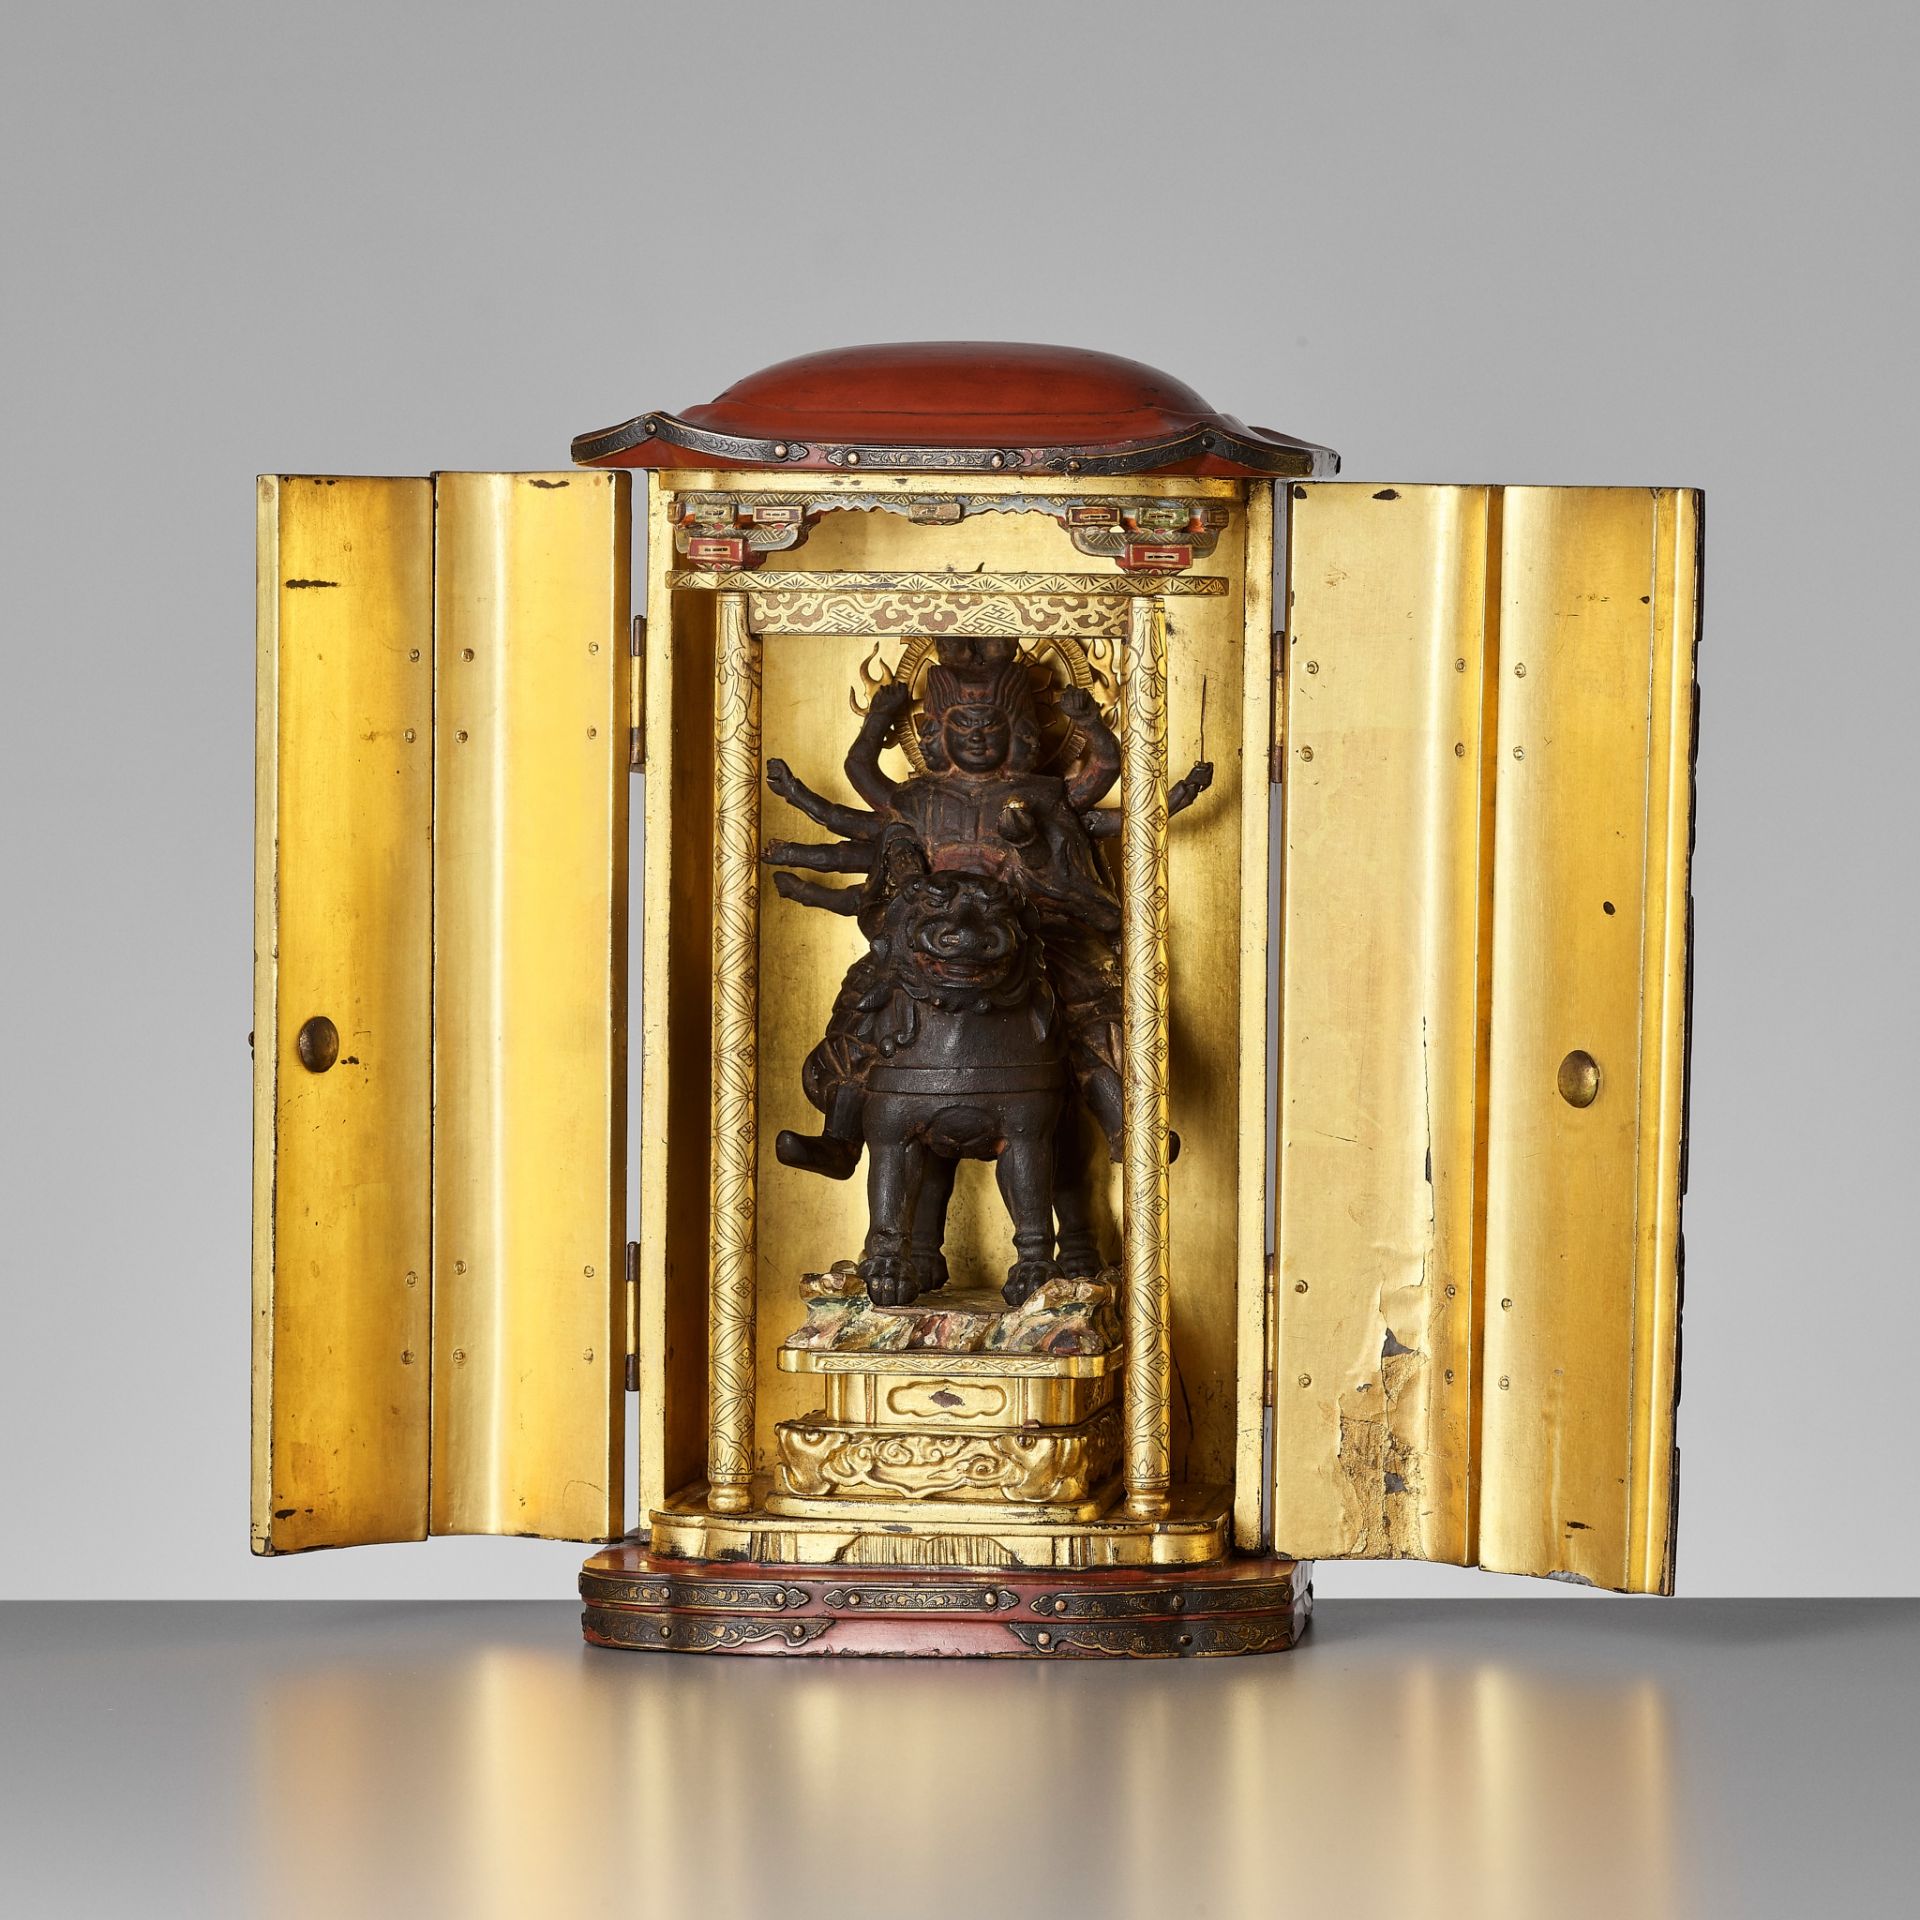 A GILT AND LACQUERED WOOD ZUSHI CONTAINING A LACQUERED WOOD FIGURE OF TOBATSU BISHAMONTEN - Image 7 of 13